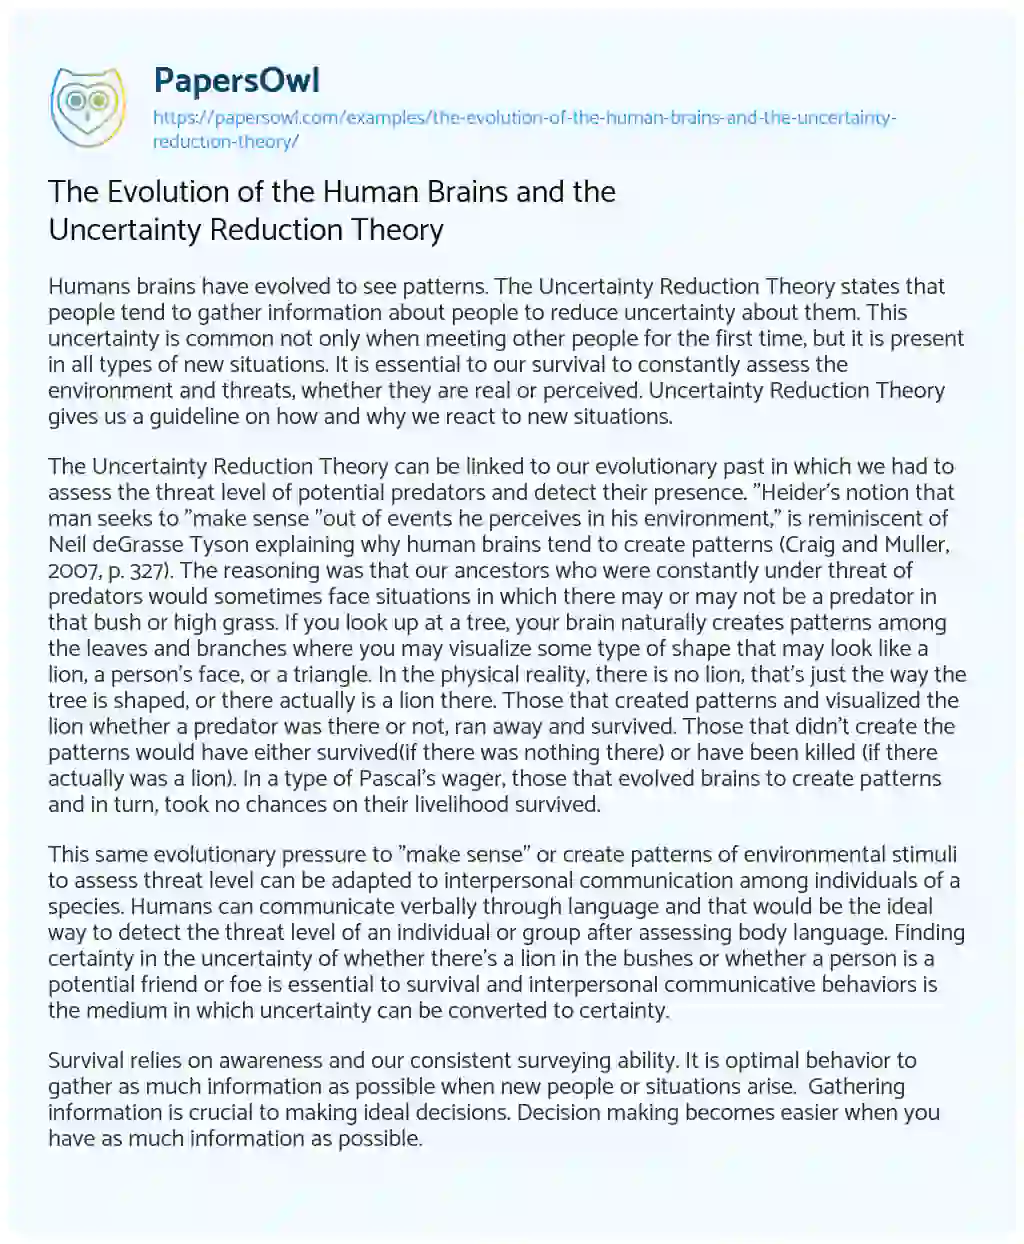 Essay on The Evolution of the Human Brains and the Uncertainty Reduction Theory